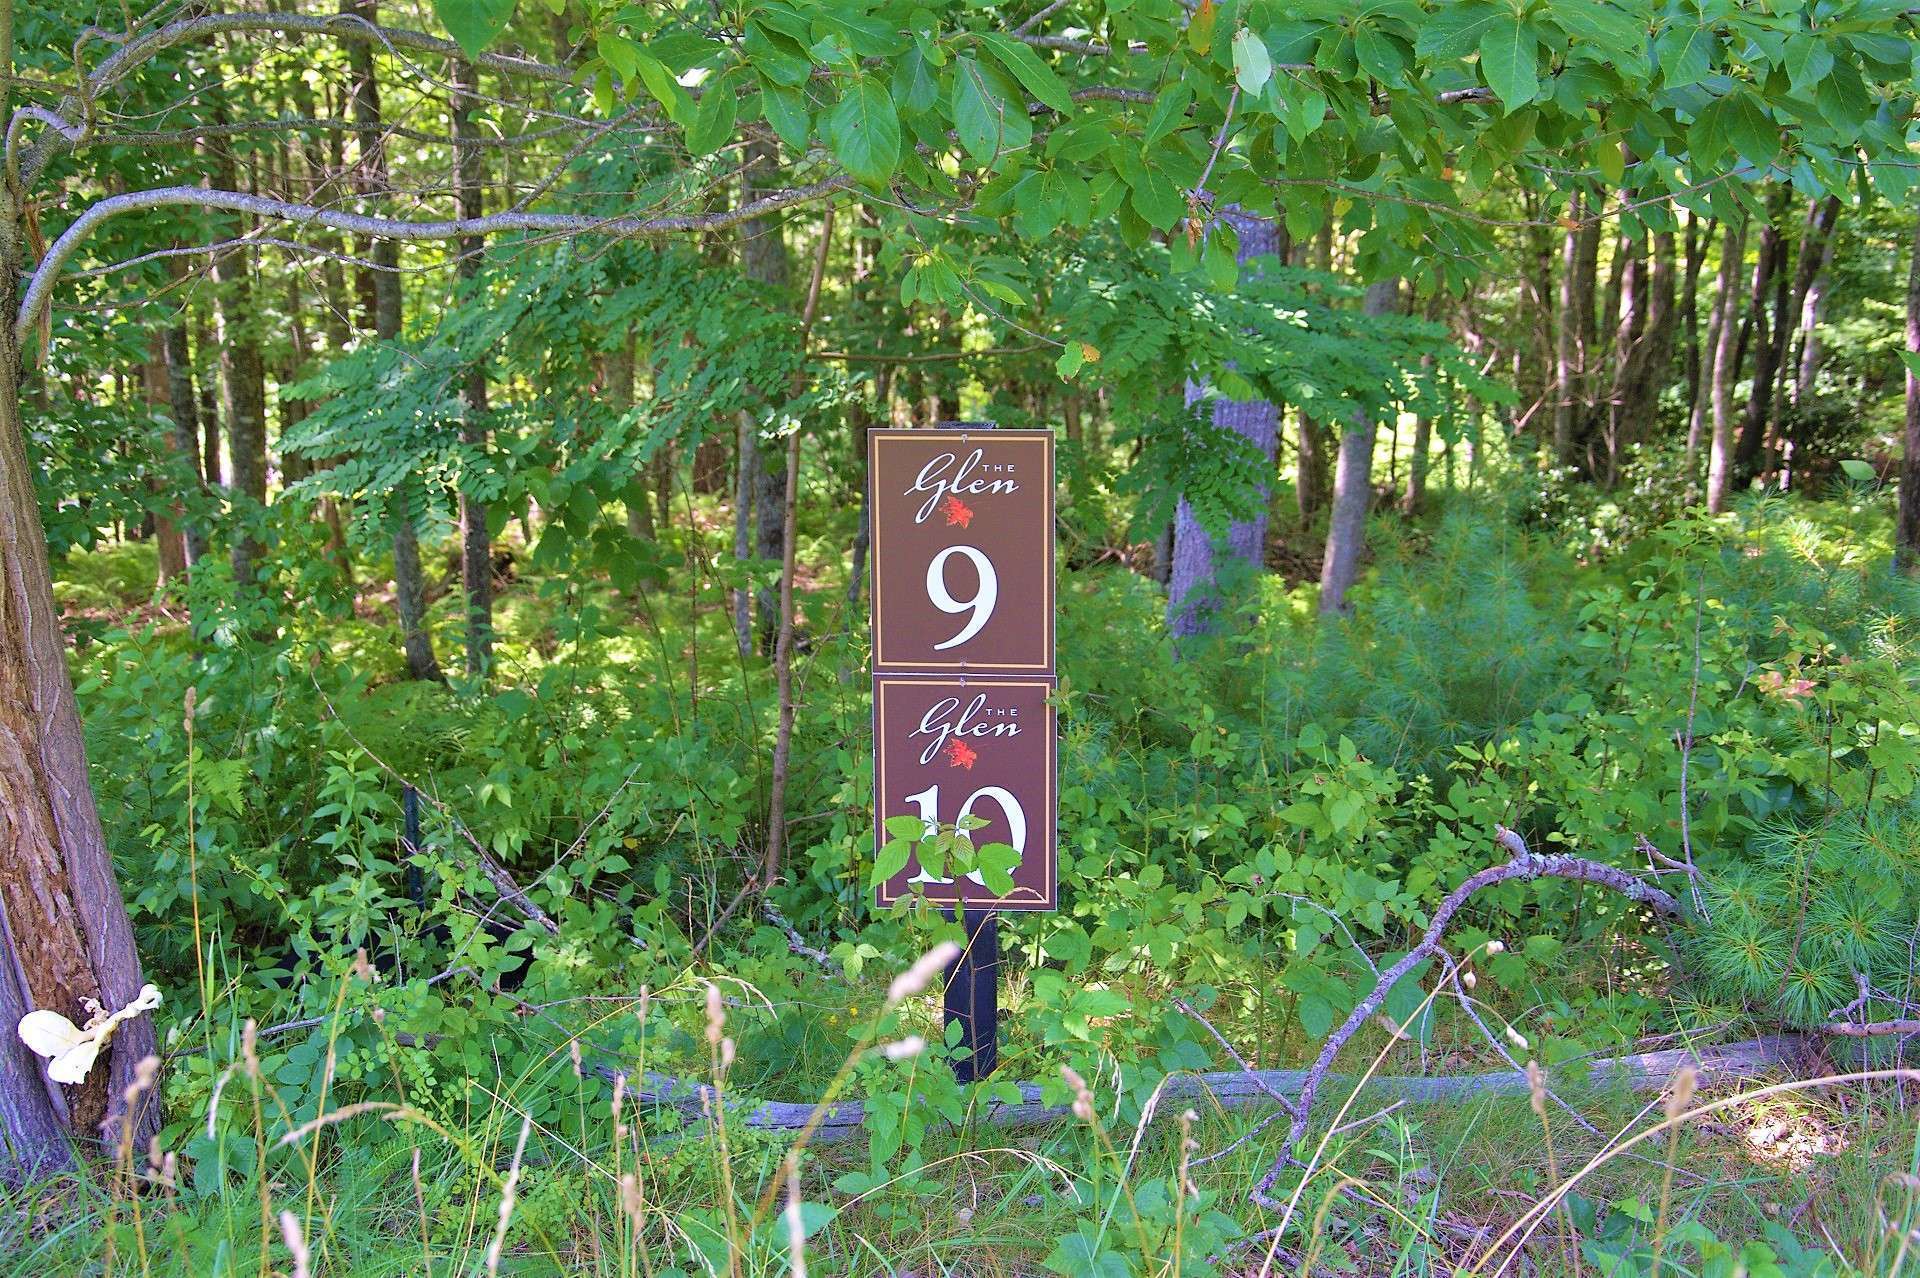 Lots 9 and 10 are available for sale.  This is a wooded 2.46 acre homesite, offering a nice building site as wells as road frontage.